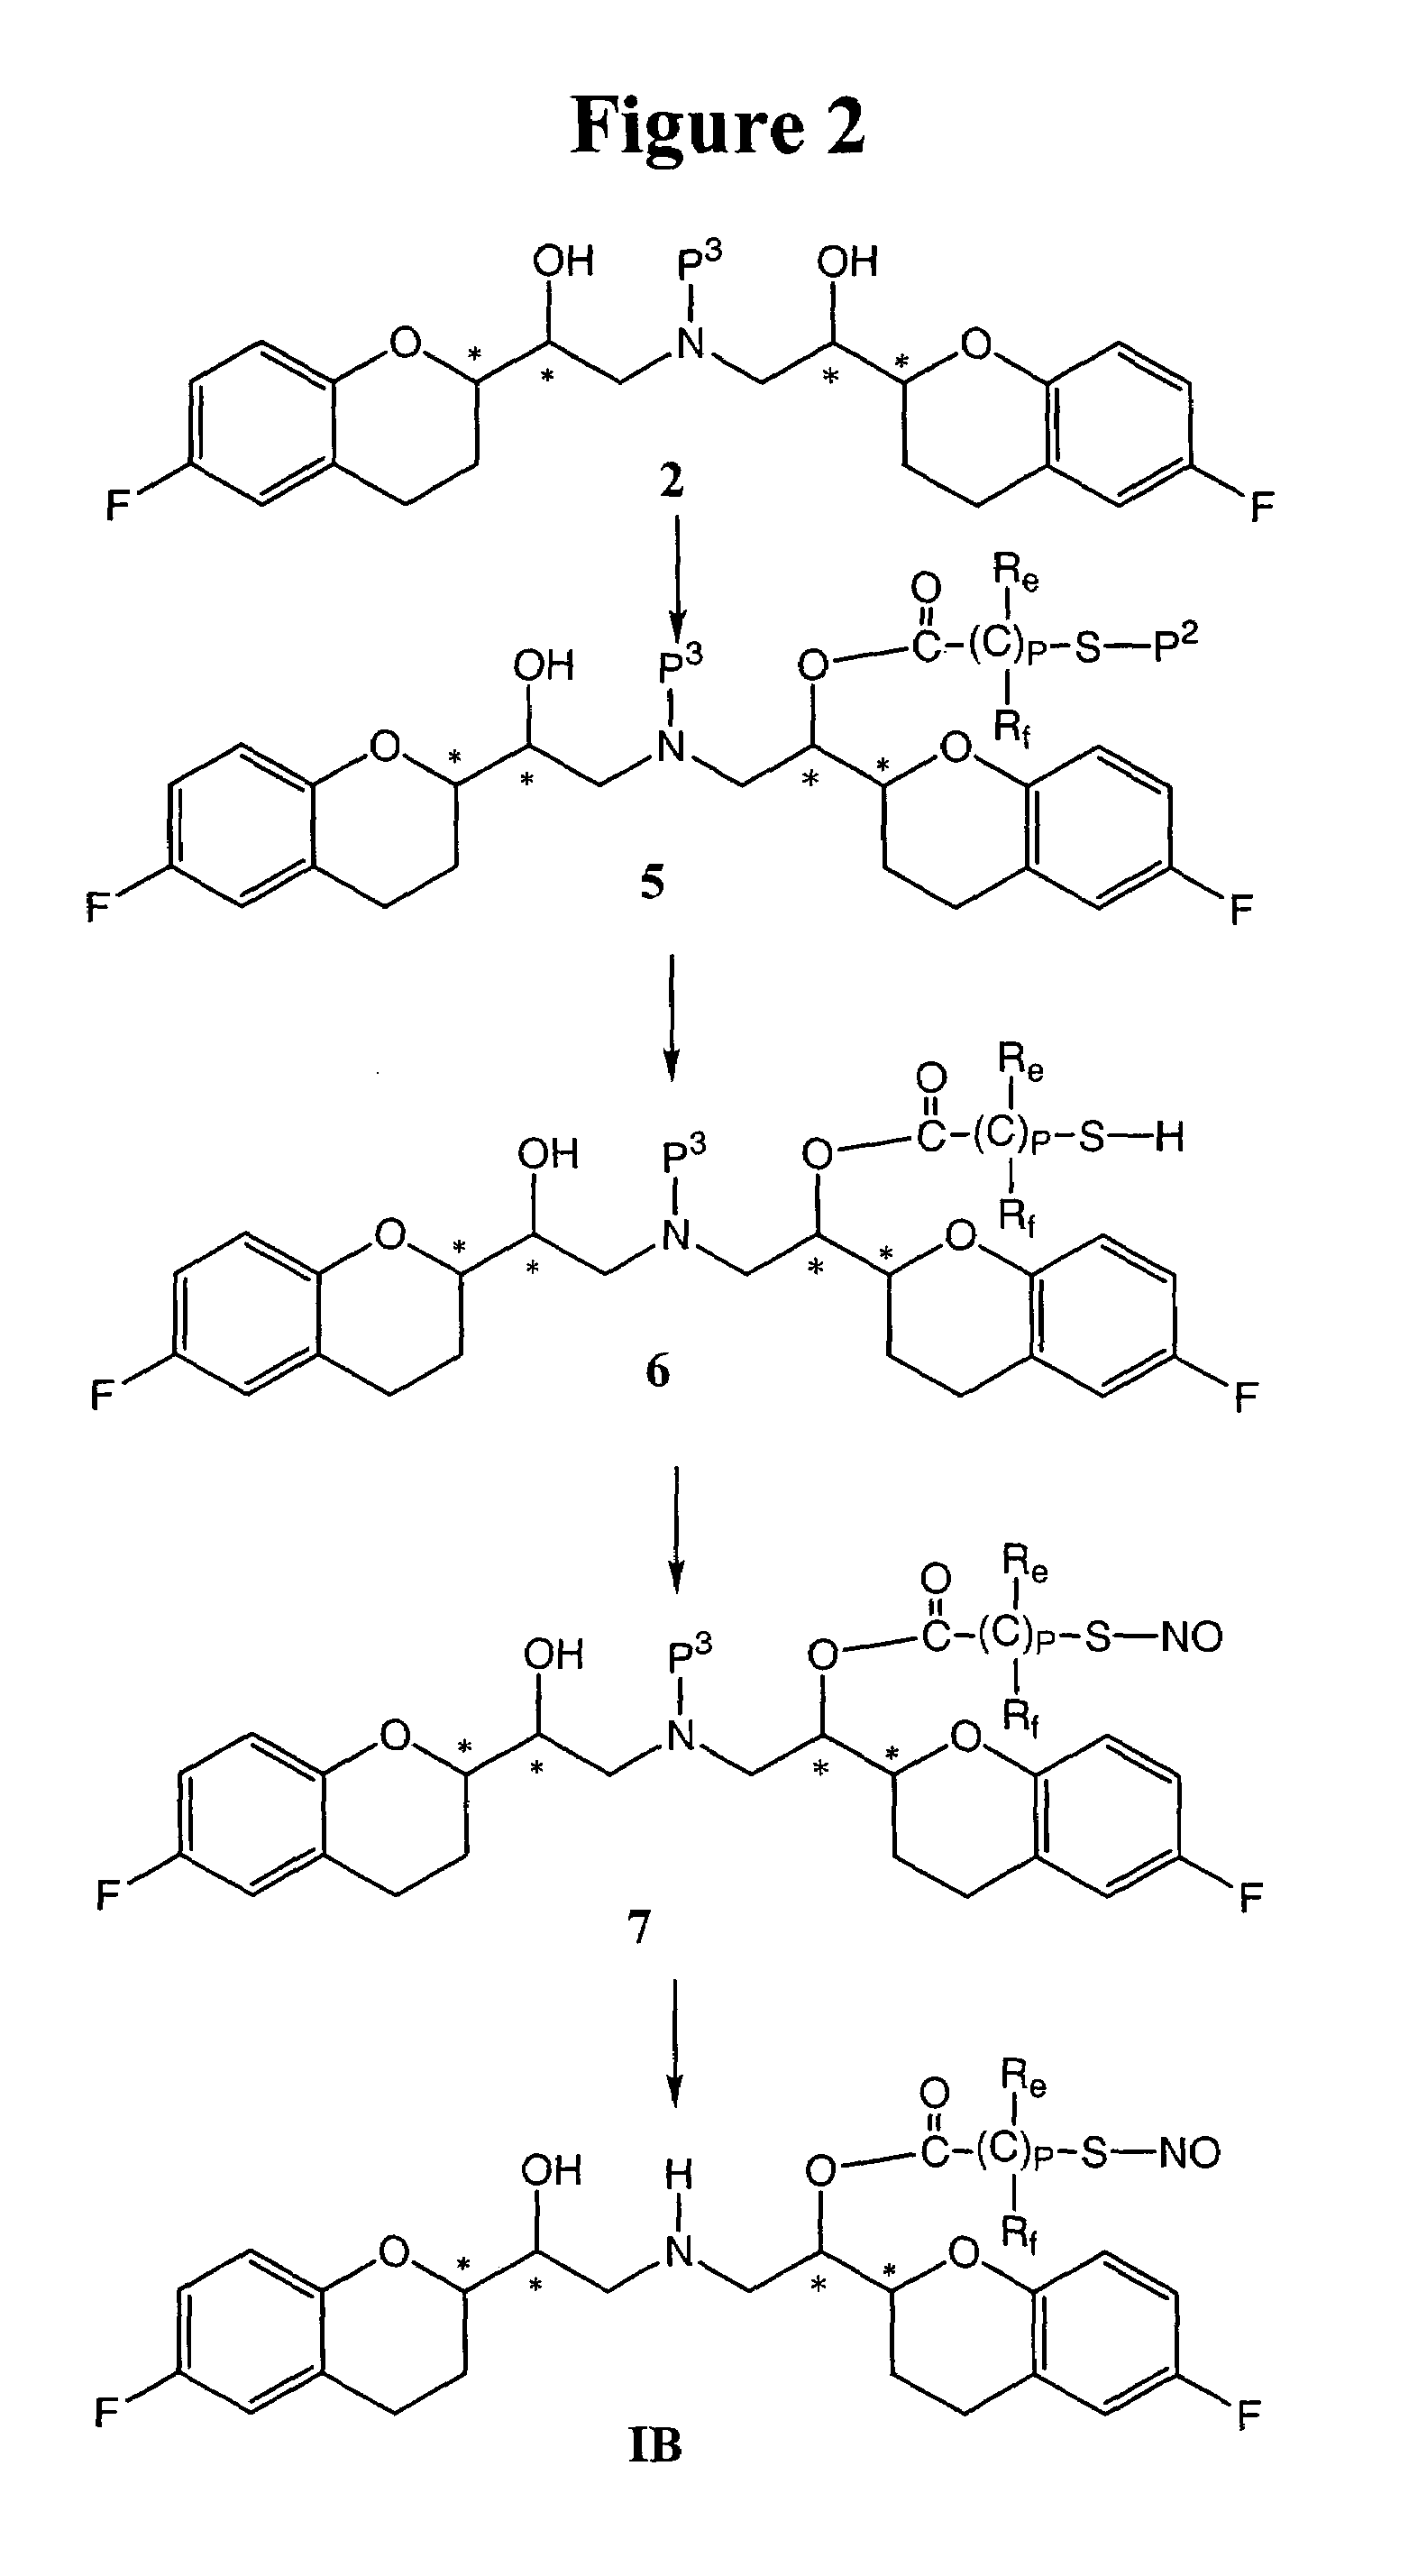 Nitrosated and nitrosylated nebivolol and its metabolites, compositions and methods of use